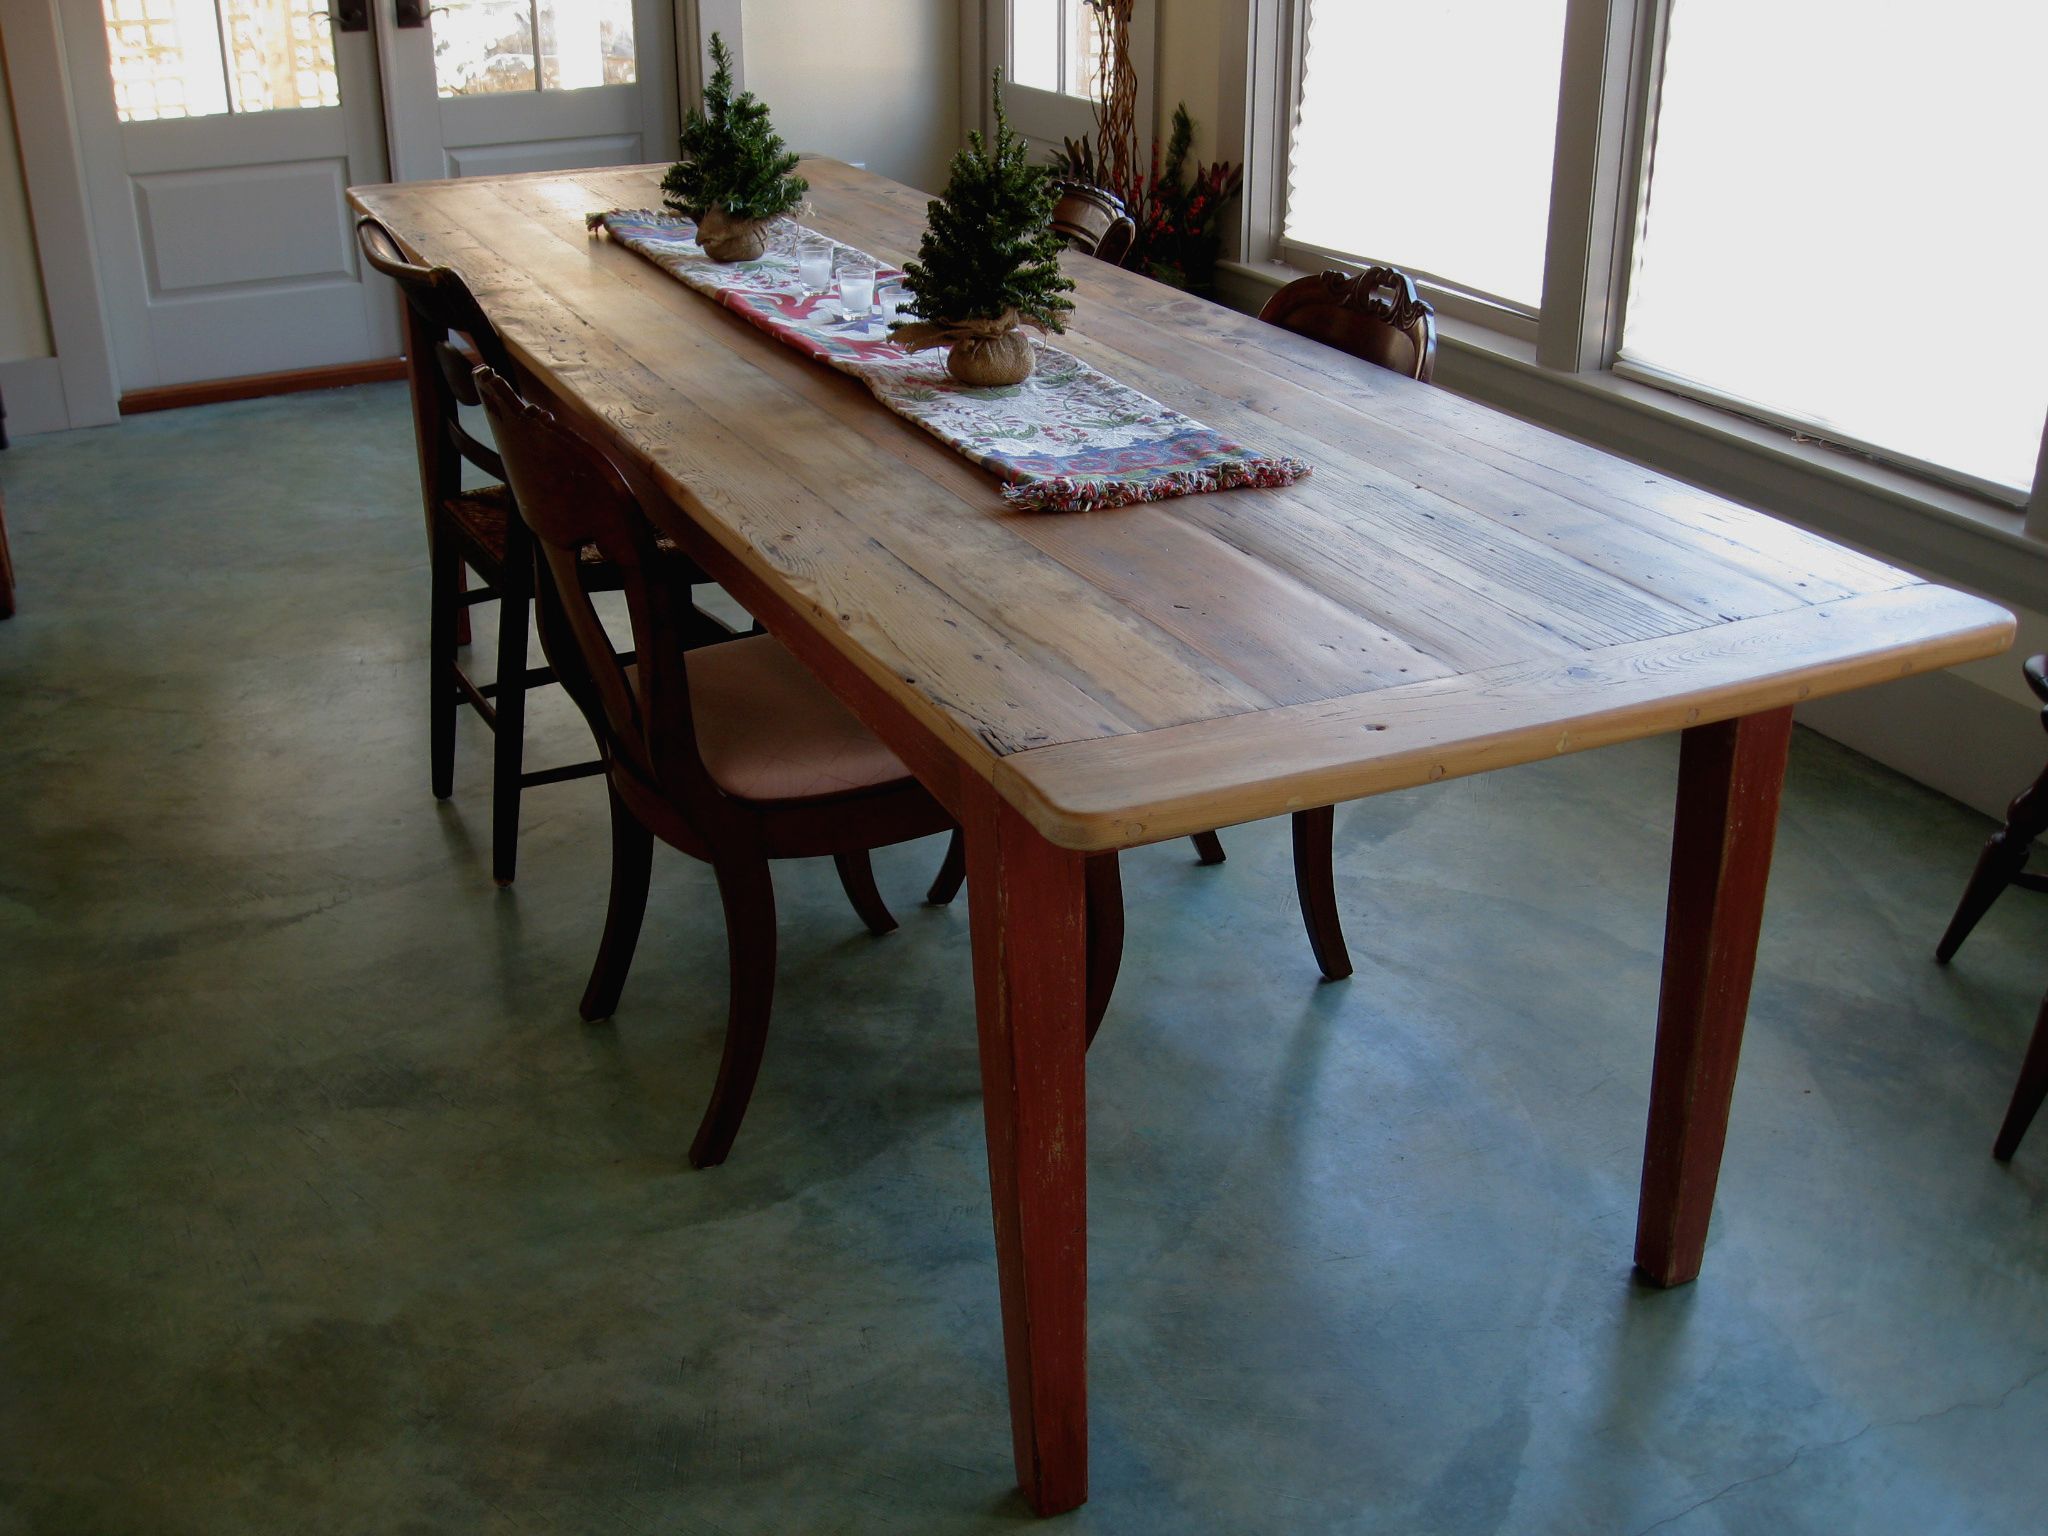 Long Rustic Dining Table With Painted Base – Lake And Pertaining To Most Current Rustic Honey Dining Tables (View 10 of 15)